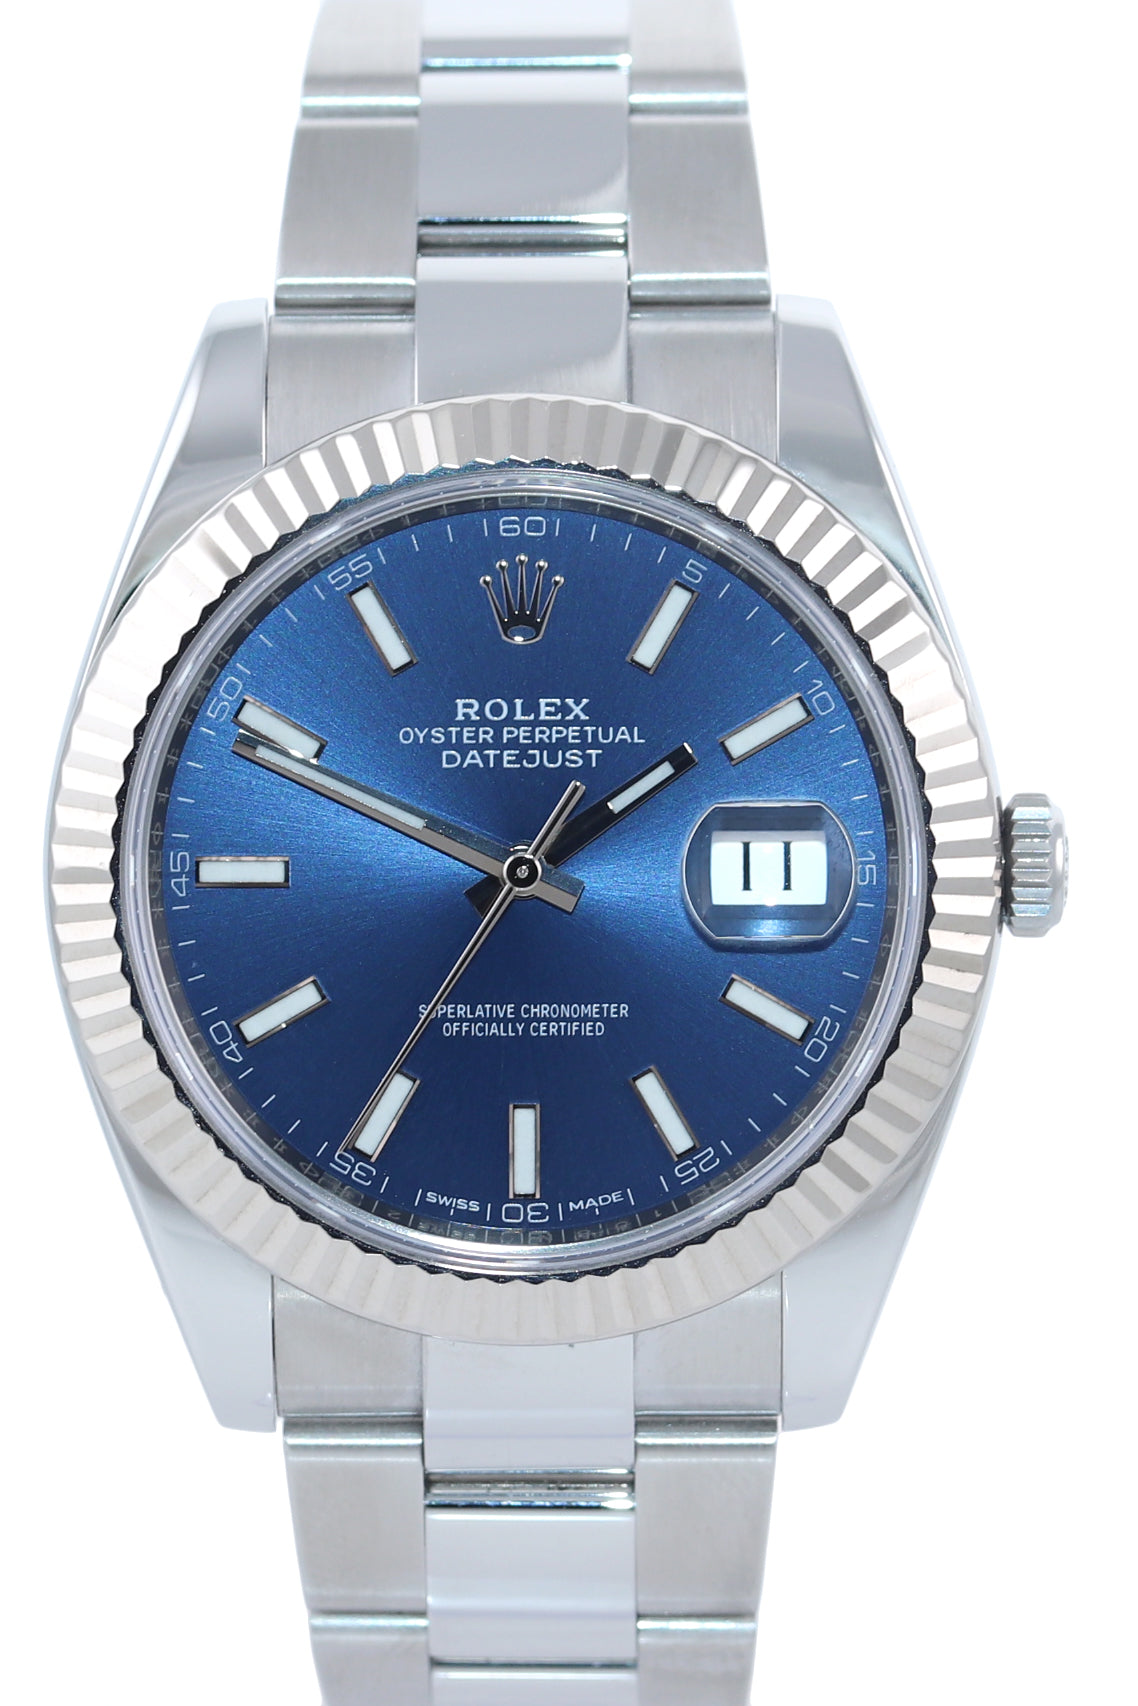 MINT PAPERS Rolex DateJust 41 Blue Stick Oyster Fluted 126334 Watch Box